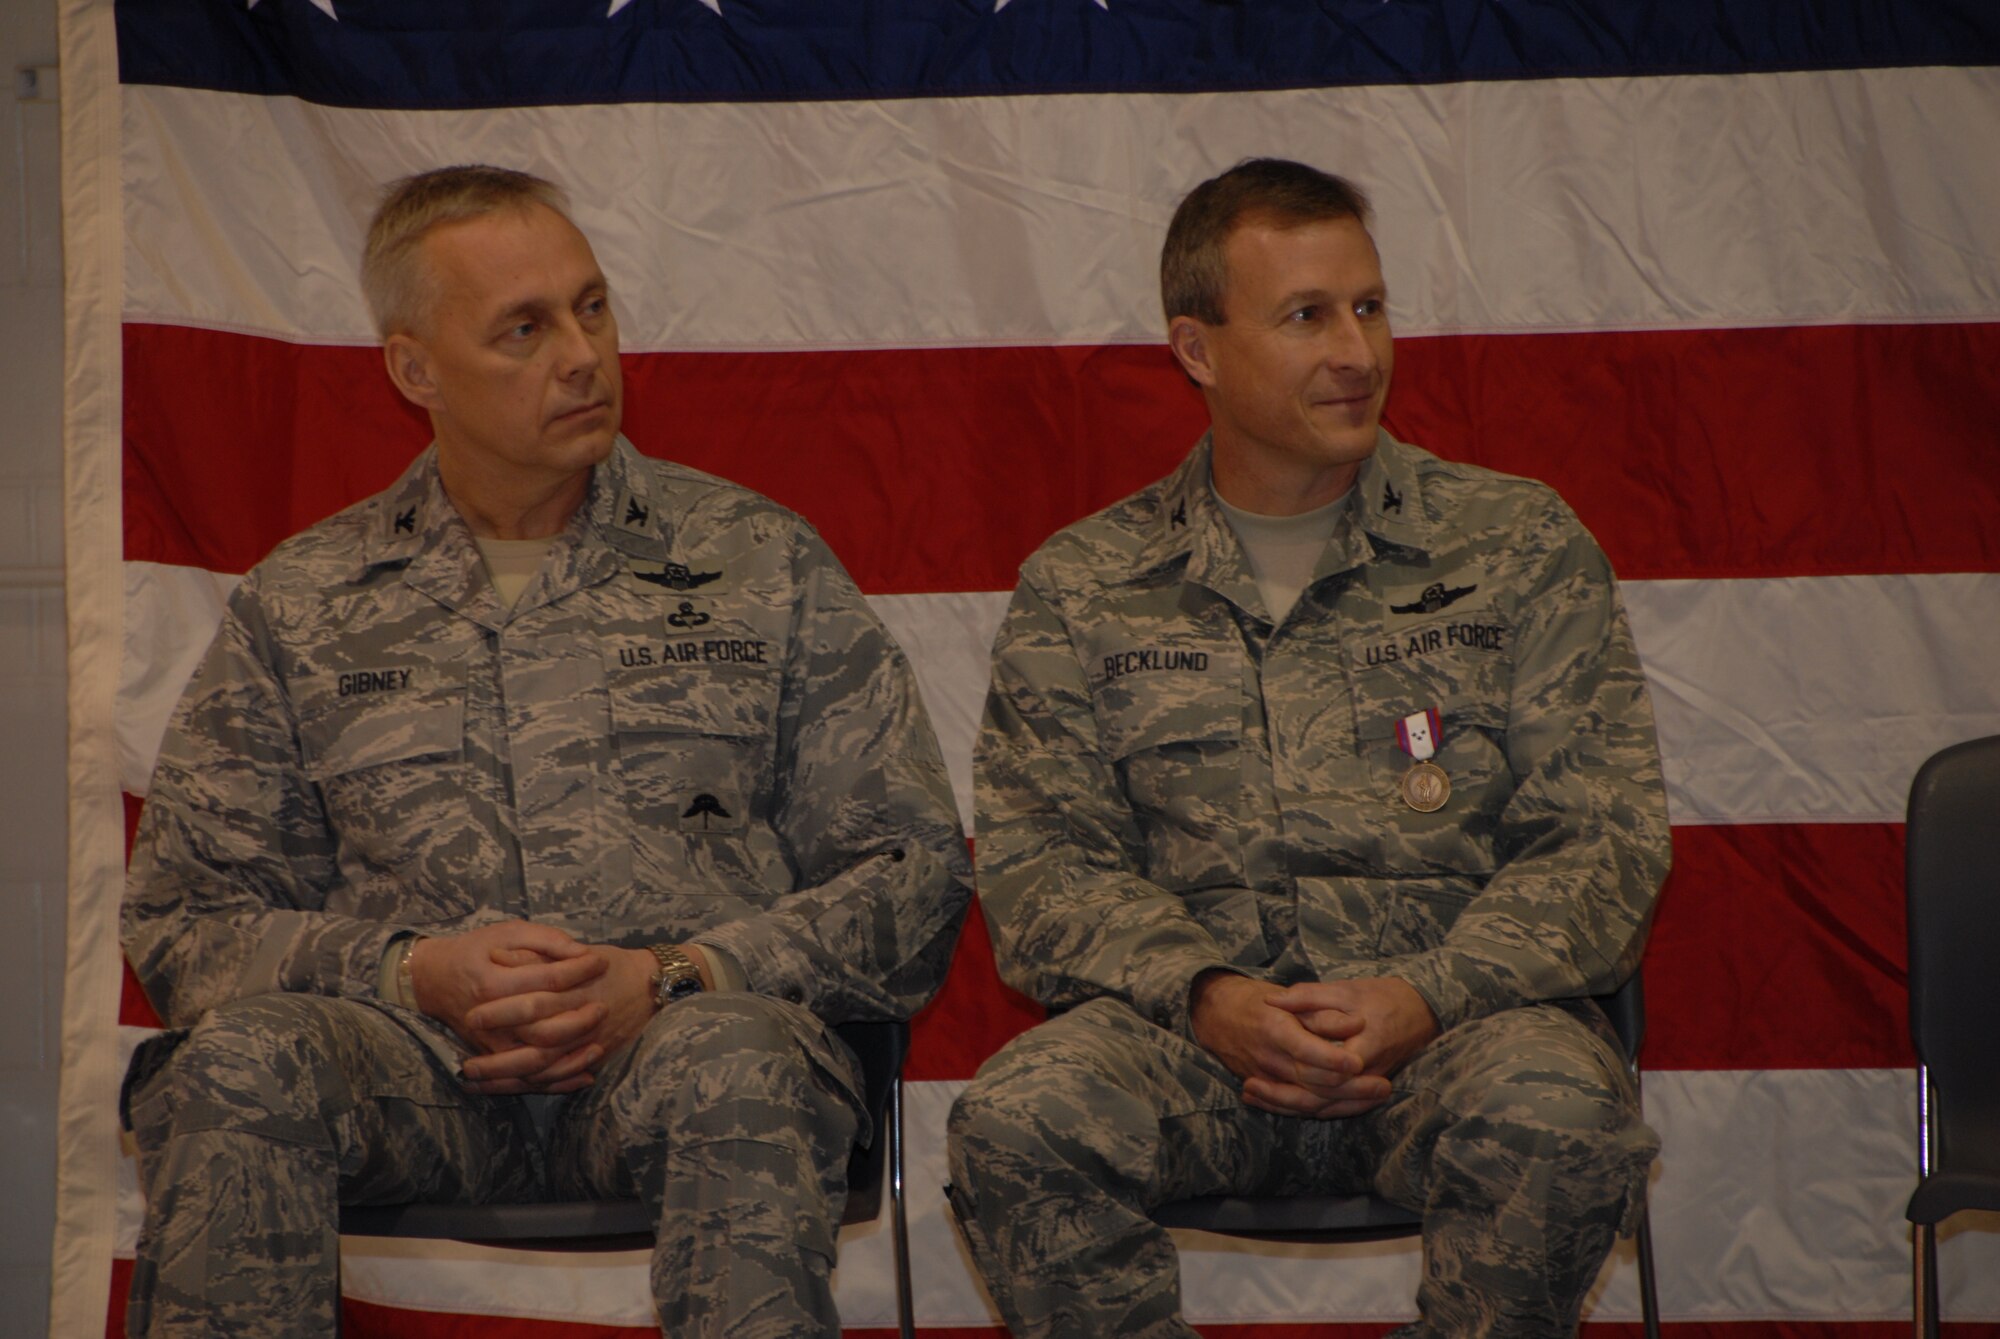 Col. Rick Gibney and Col. Robert Beckund listen to speakers during a Change of Command Ceremony that took place at the North Dakota Air National Guard on Dec. 5th.  Col. Robert Becklund relinquished command of the 119th Wing to Col. Rick Gibney during the ceremony.